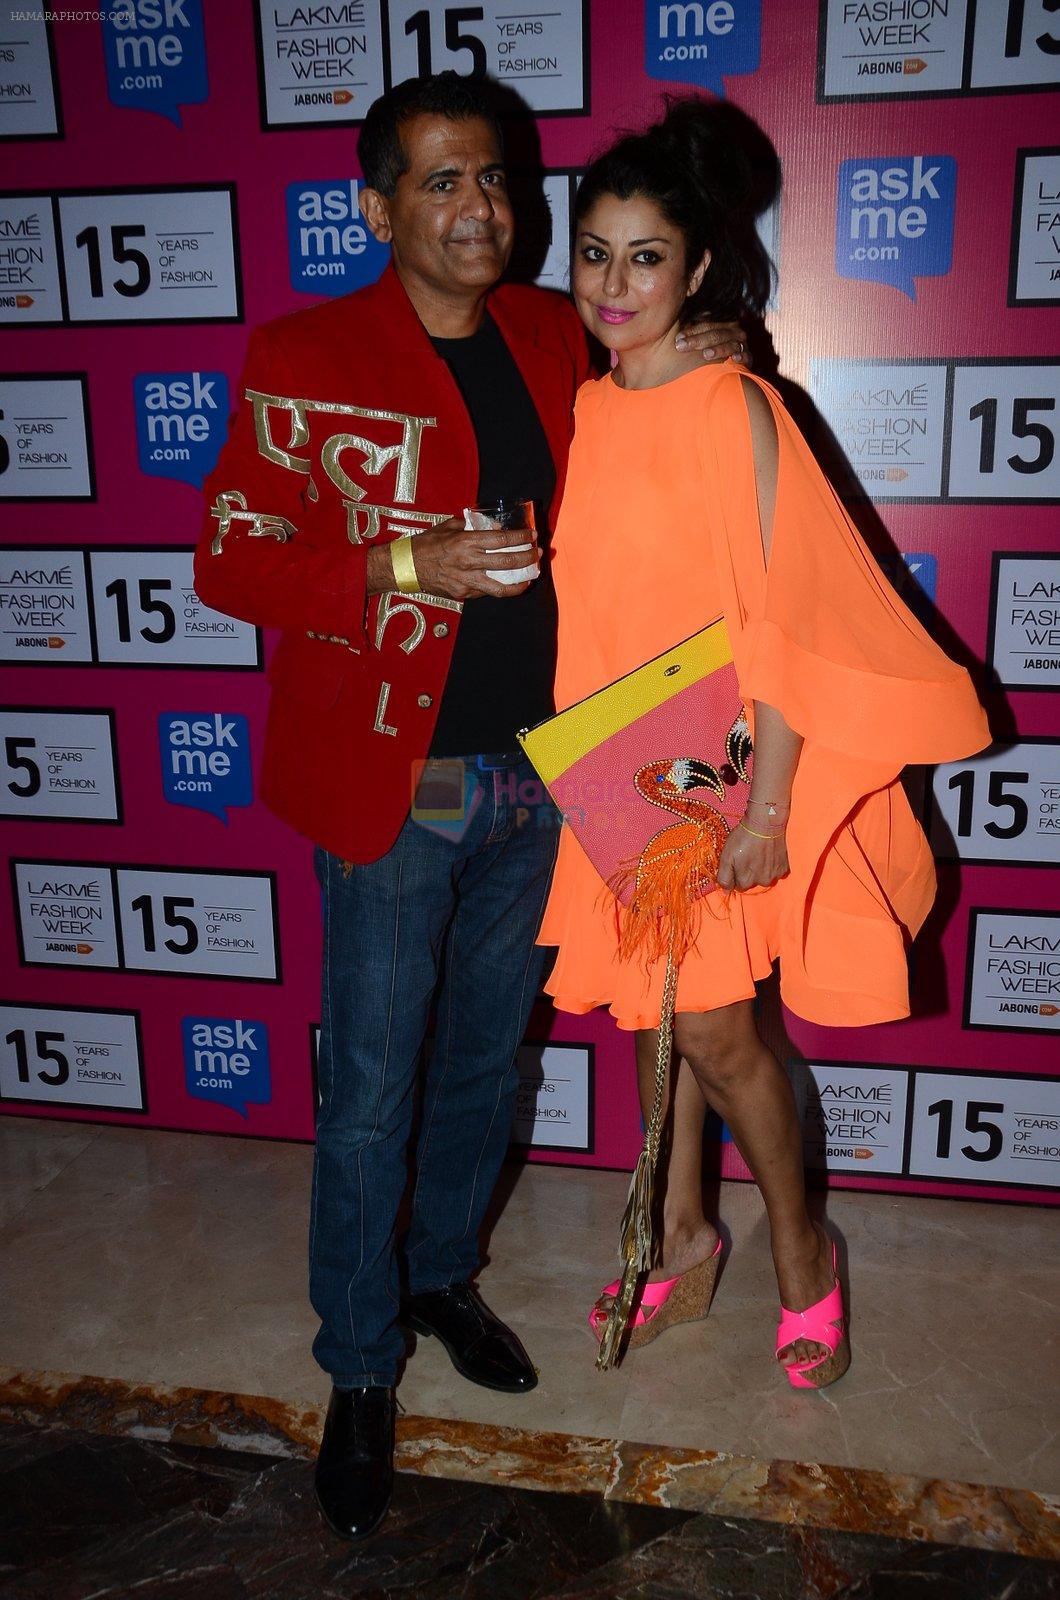 at Anamika Khanna Grand Finale Show at Lakme Fashion Week 2015 Day 5 on 22nd March 2015